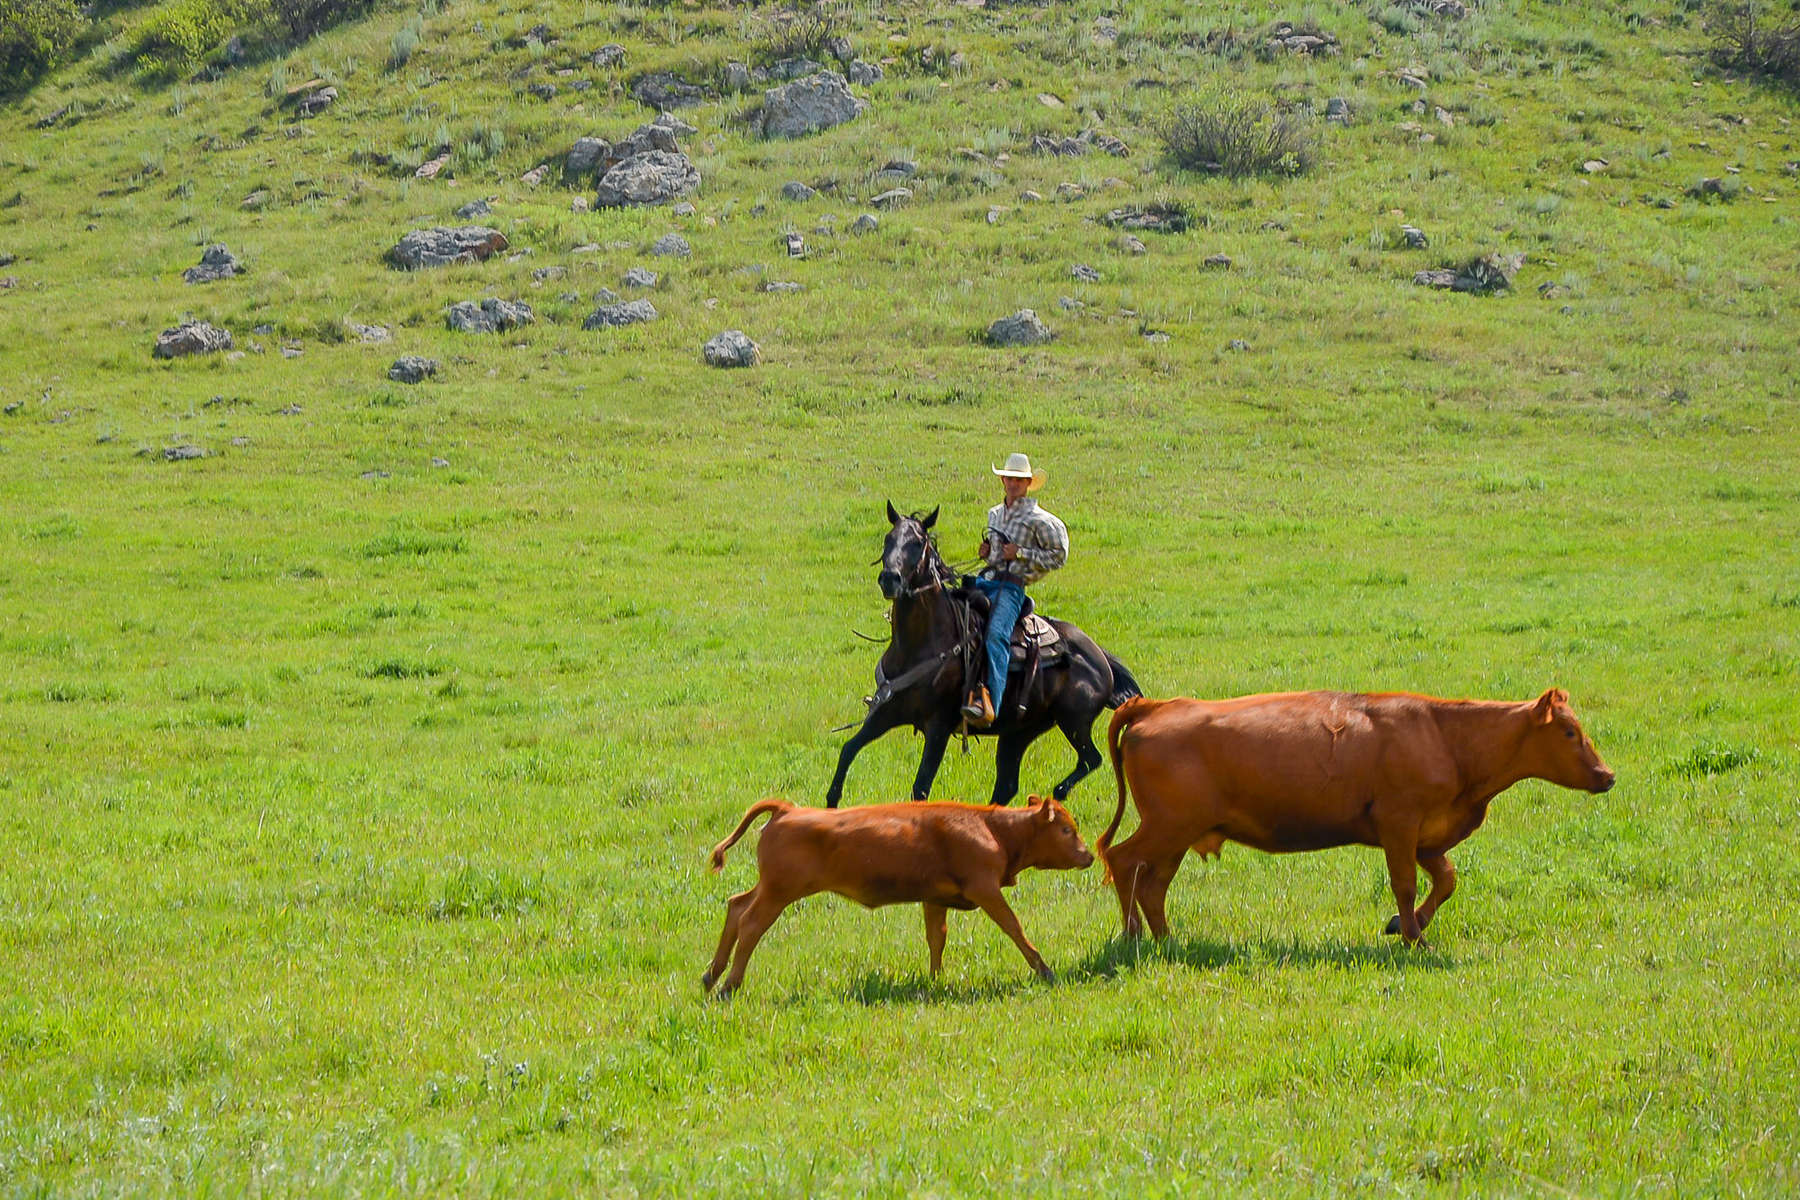 Cowboy rounding up cattle on a ranch holiday